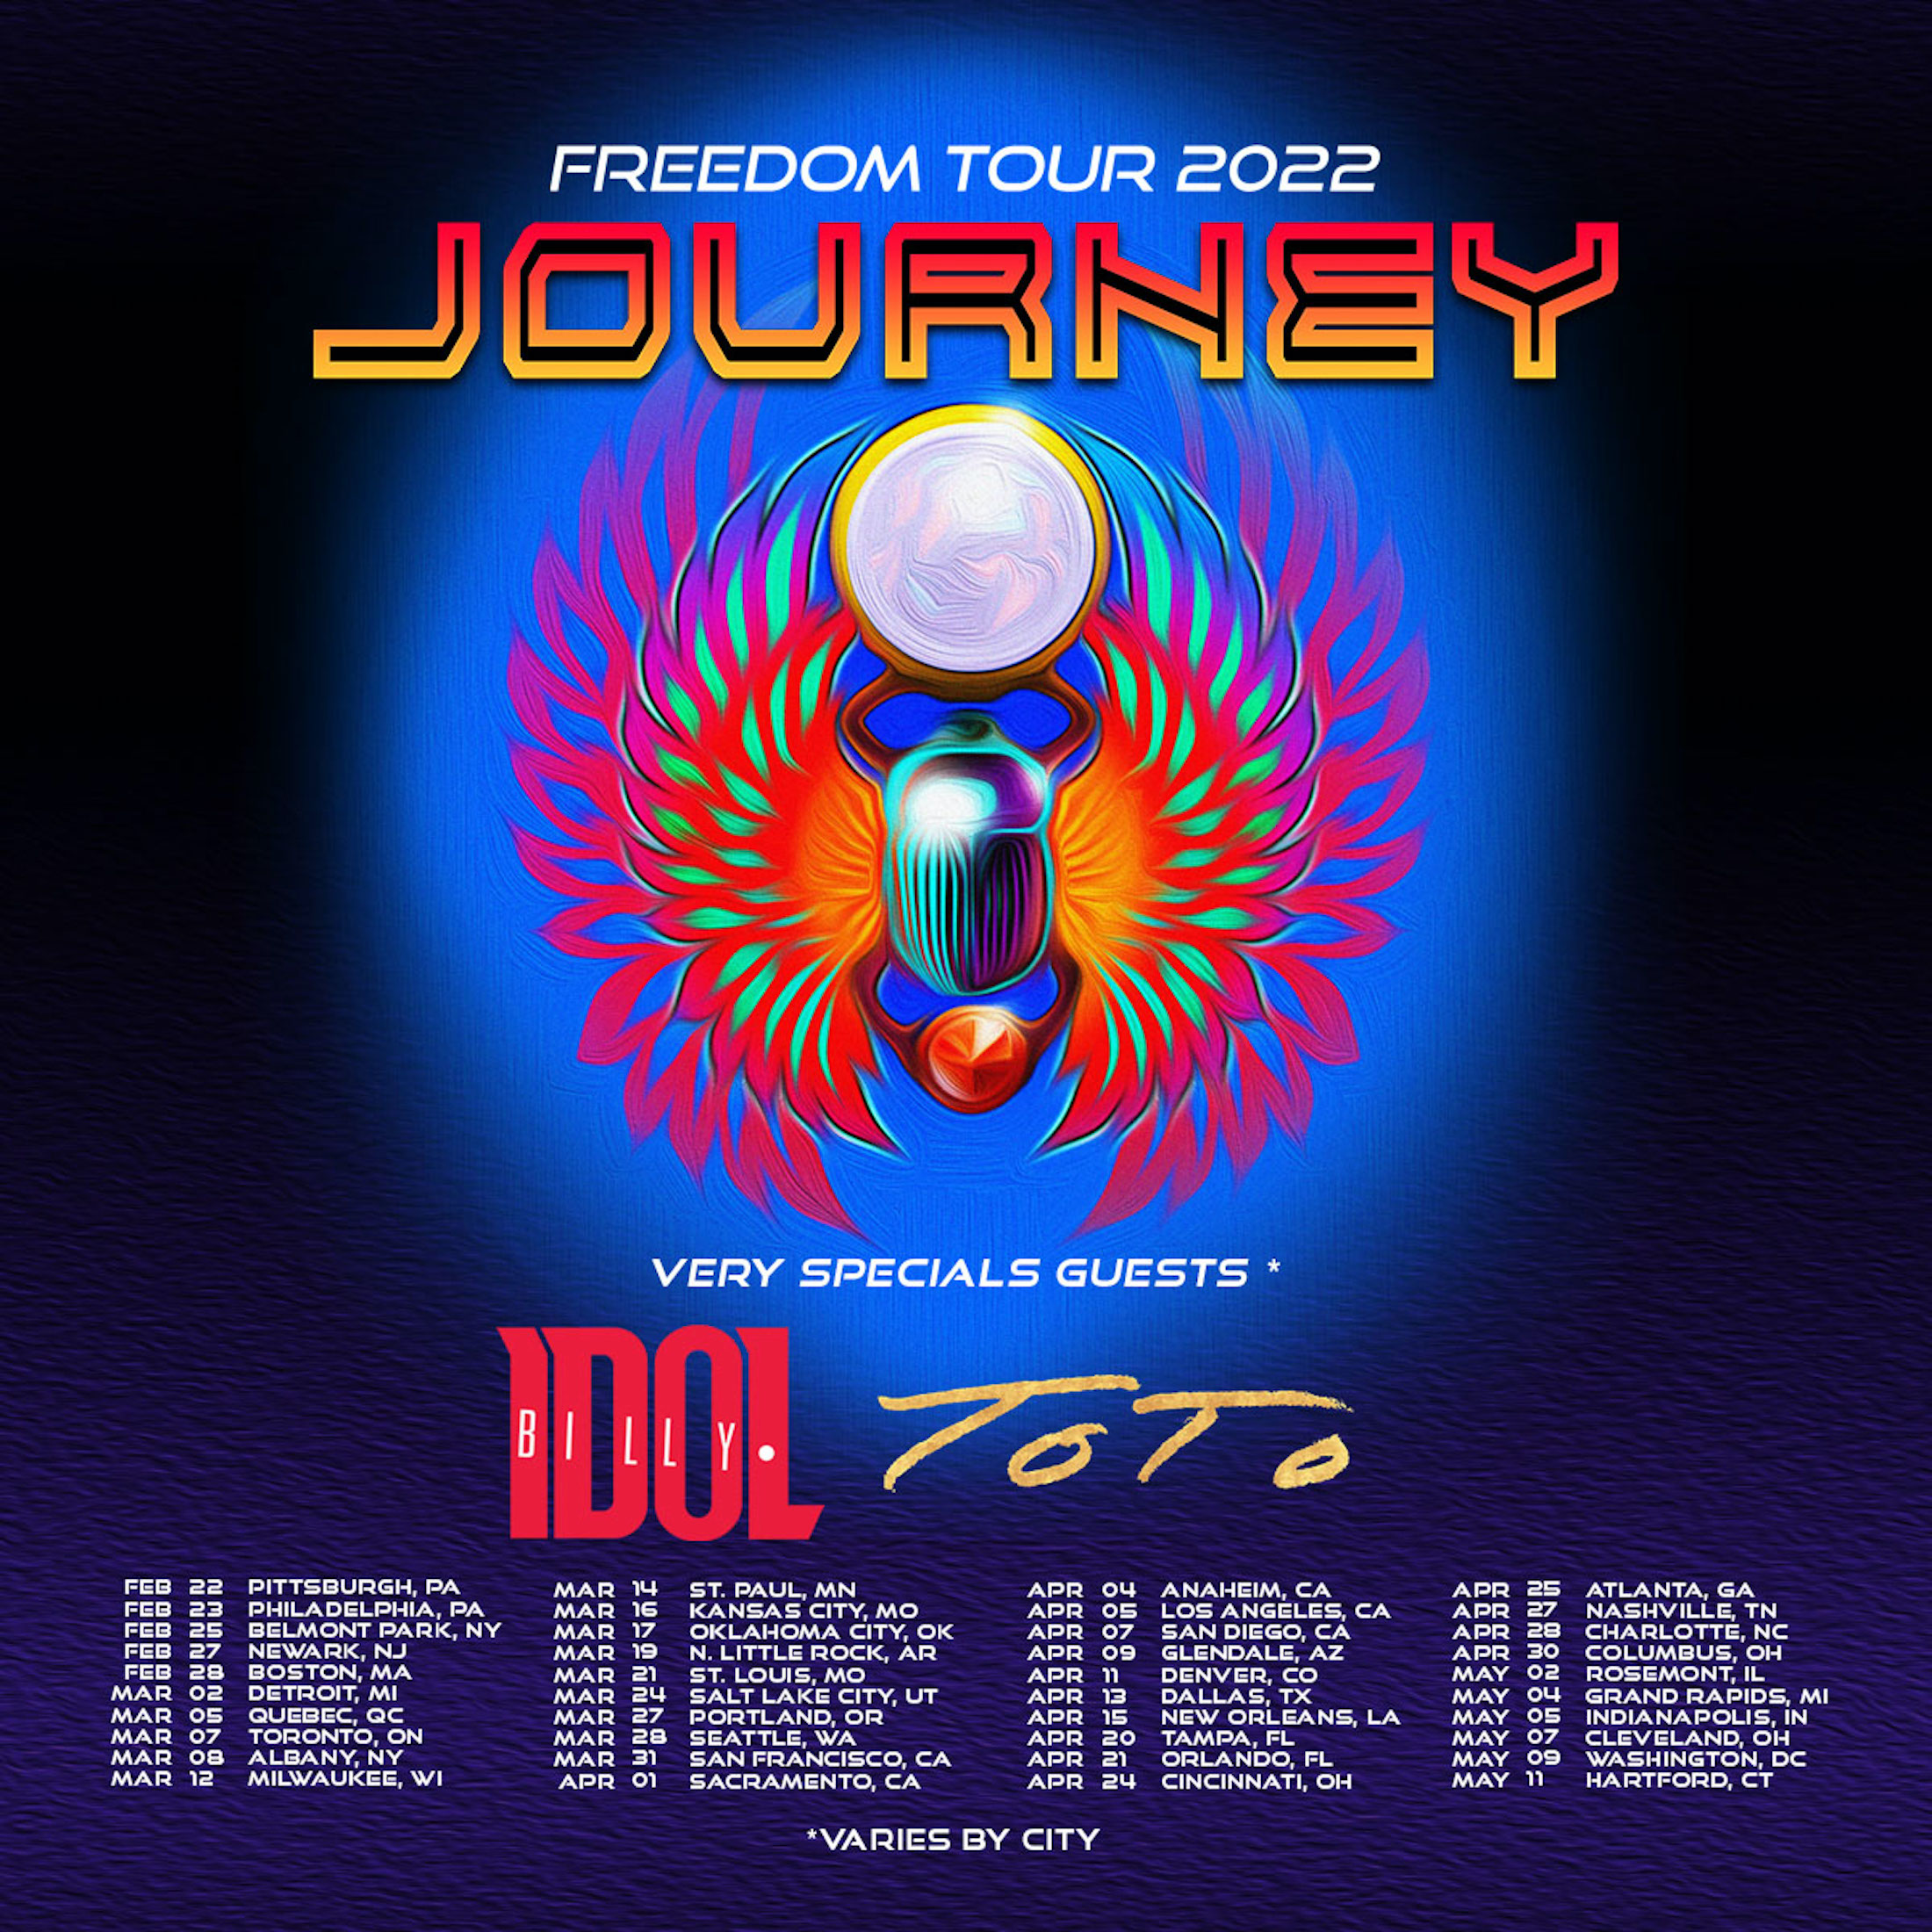 Journey Concert Schedule 2022 Rock & Roll Hall Of Fame Legends Journey Announce Freedom Tour 2022 |  Grateful Web